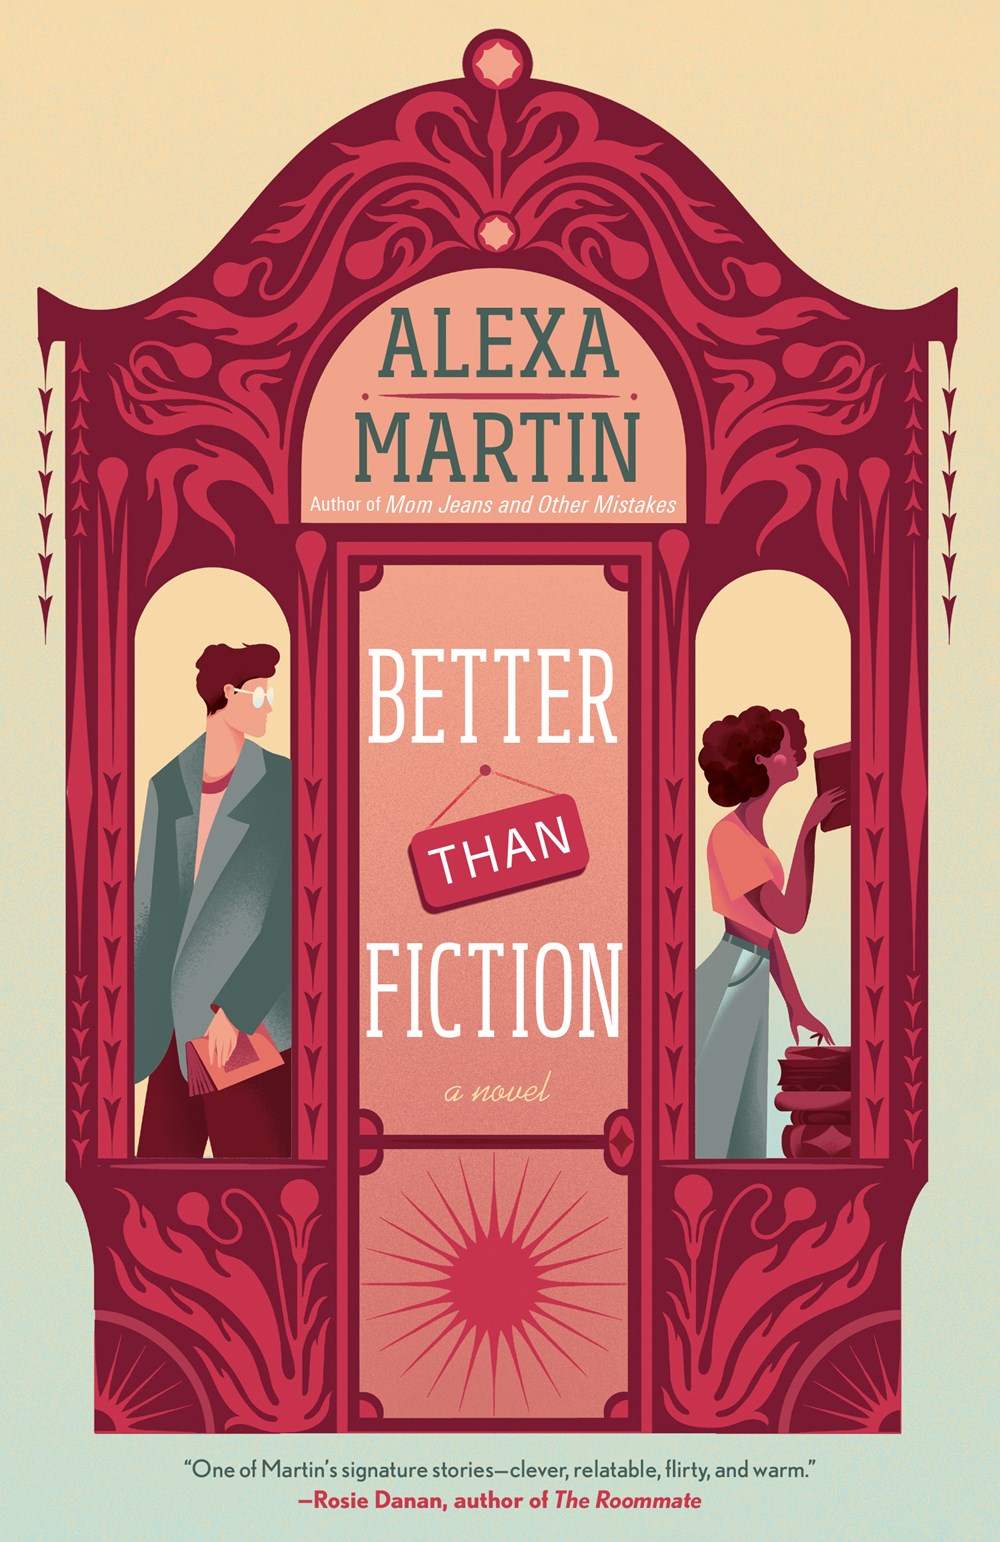 Image of "Better Than Fiction"